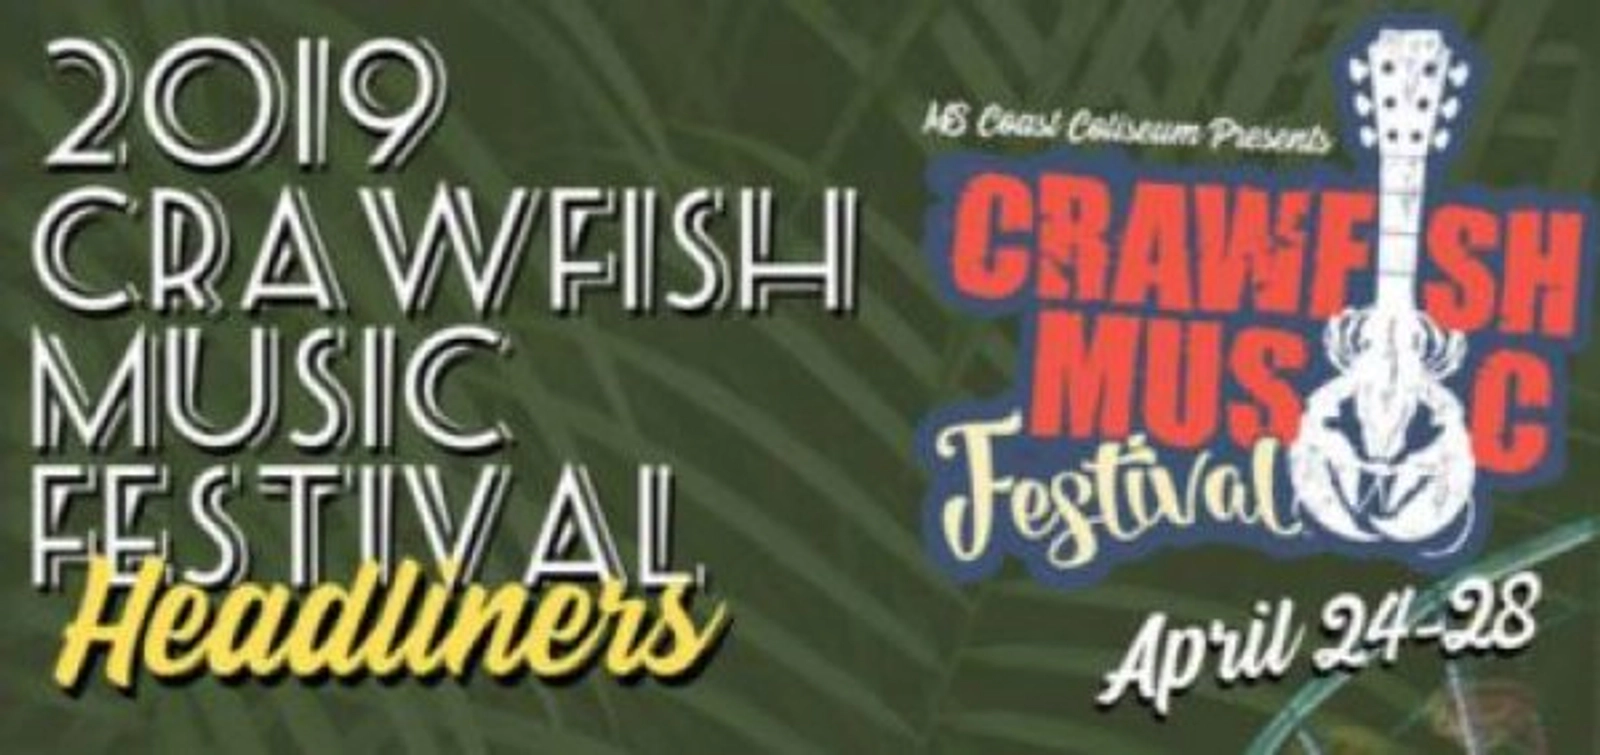  Win VIP tickets to the Crawfish Music Festival in Biloxi  - Thumbnail Image